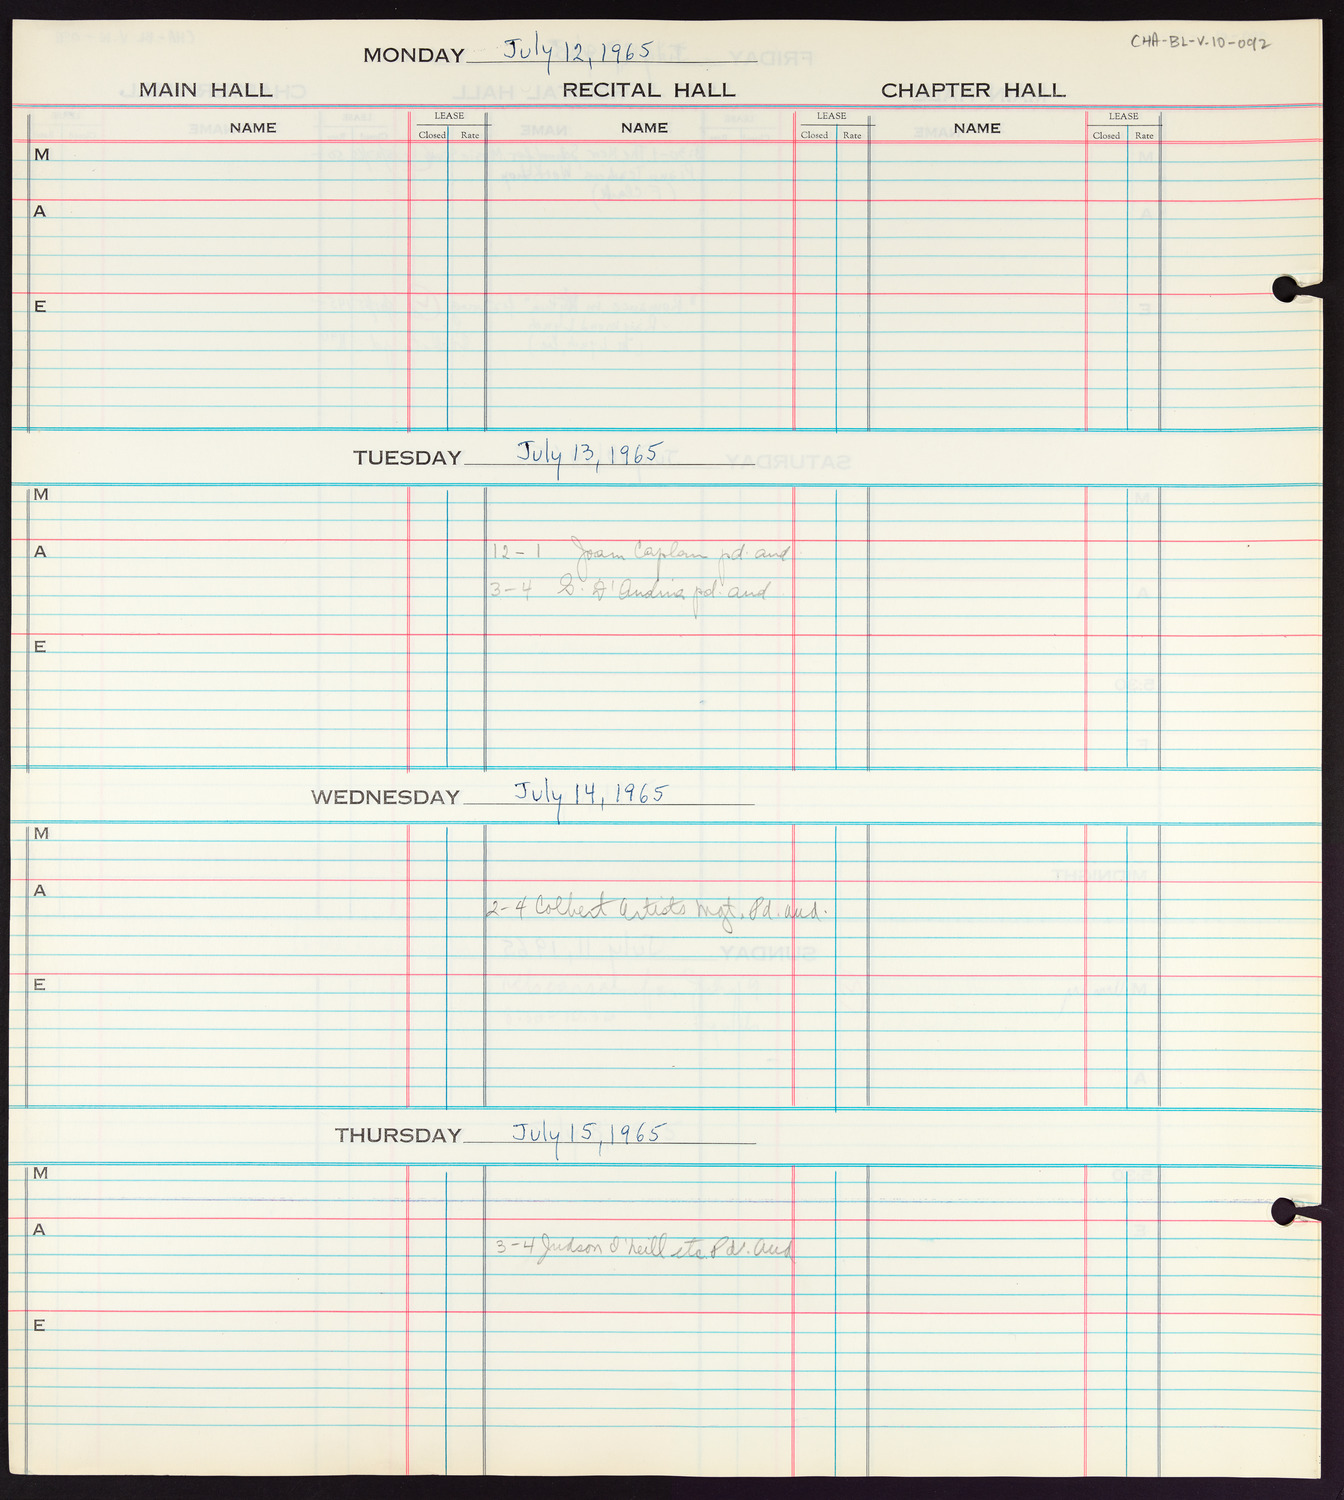 Carnegie Hall Booking Ledger, volume 10, page 92